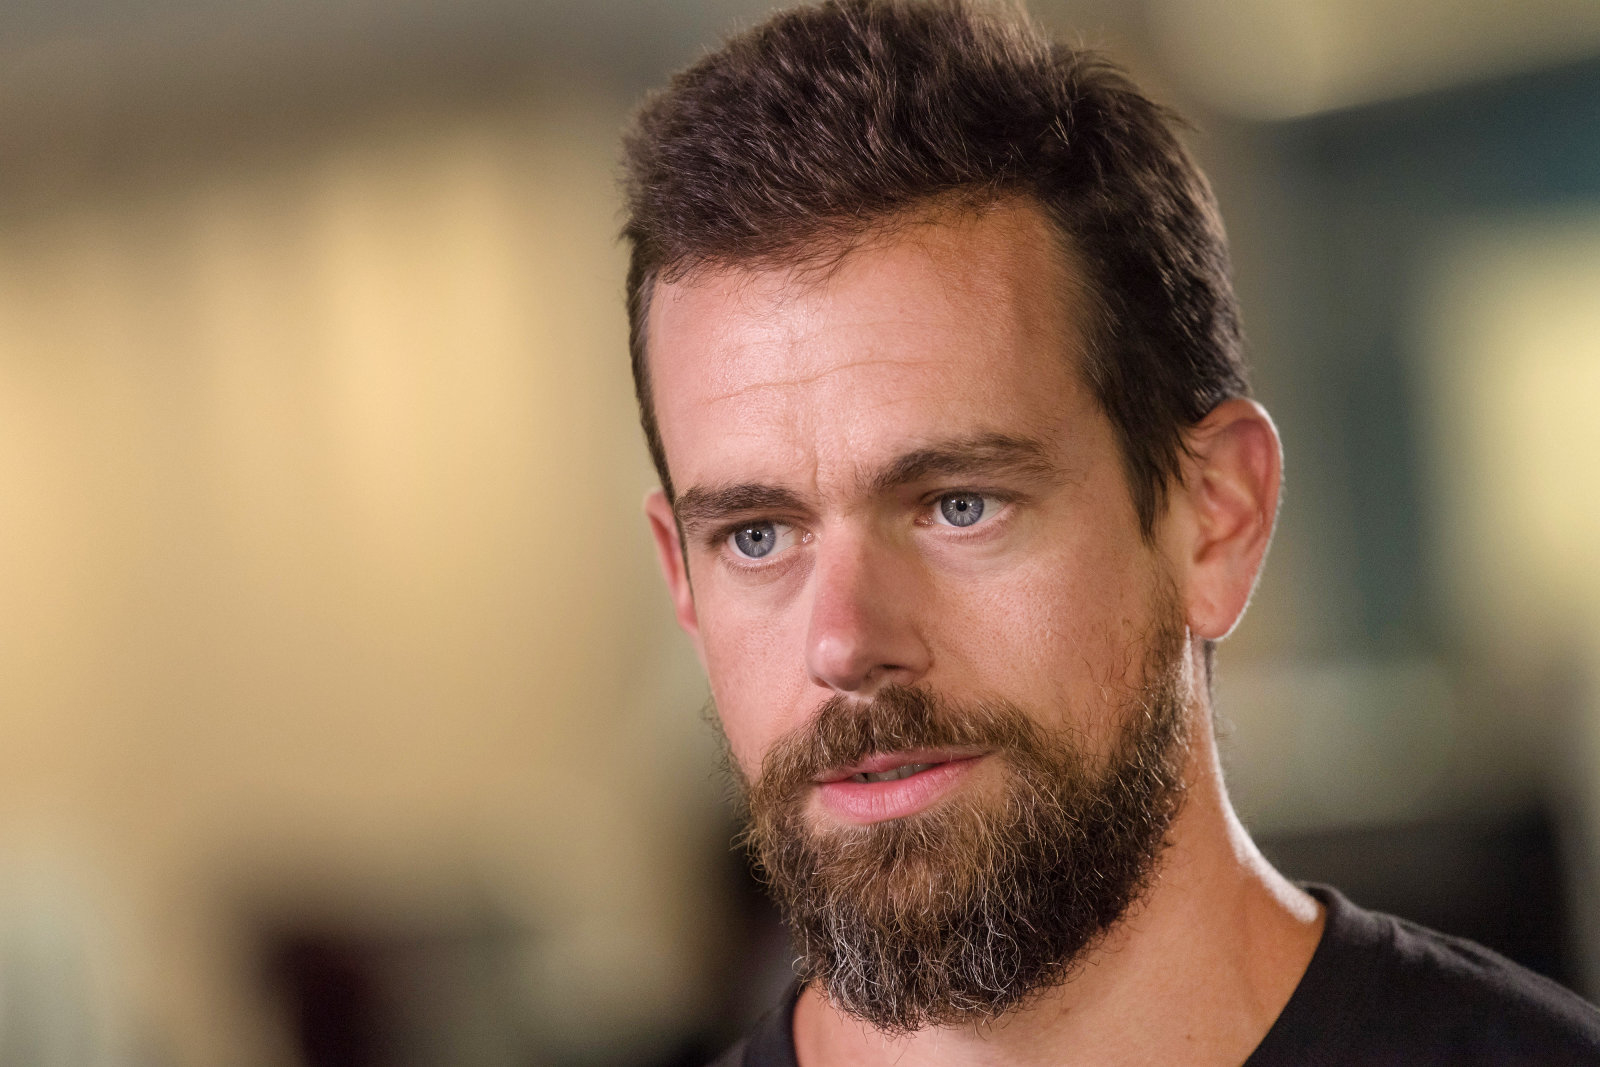 Jack Dorsey, chief executive officer and co-founder of Square Inc., speaks during a Bloomberg Television interview in San Francisco, California, U.S., on Wednesday, Aug. 2, 2017. Dorsey discussed earnings, sources of new growth, and his outlook for the company. Photographer: David Paul Morris/Bloomberg via Getty Images